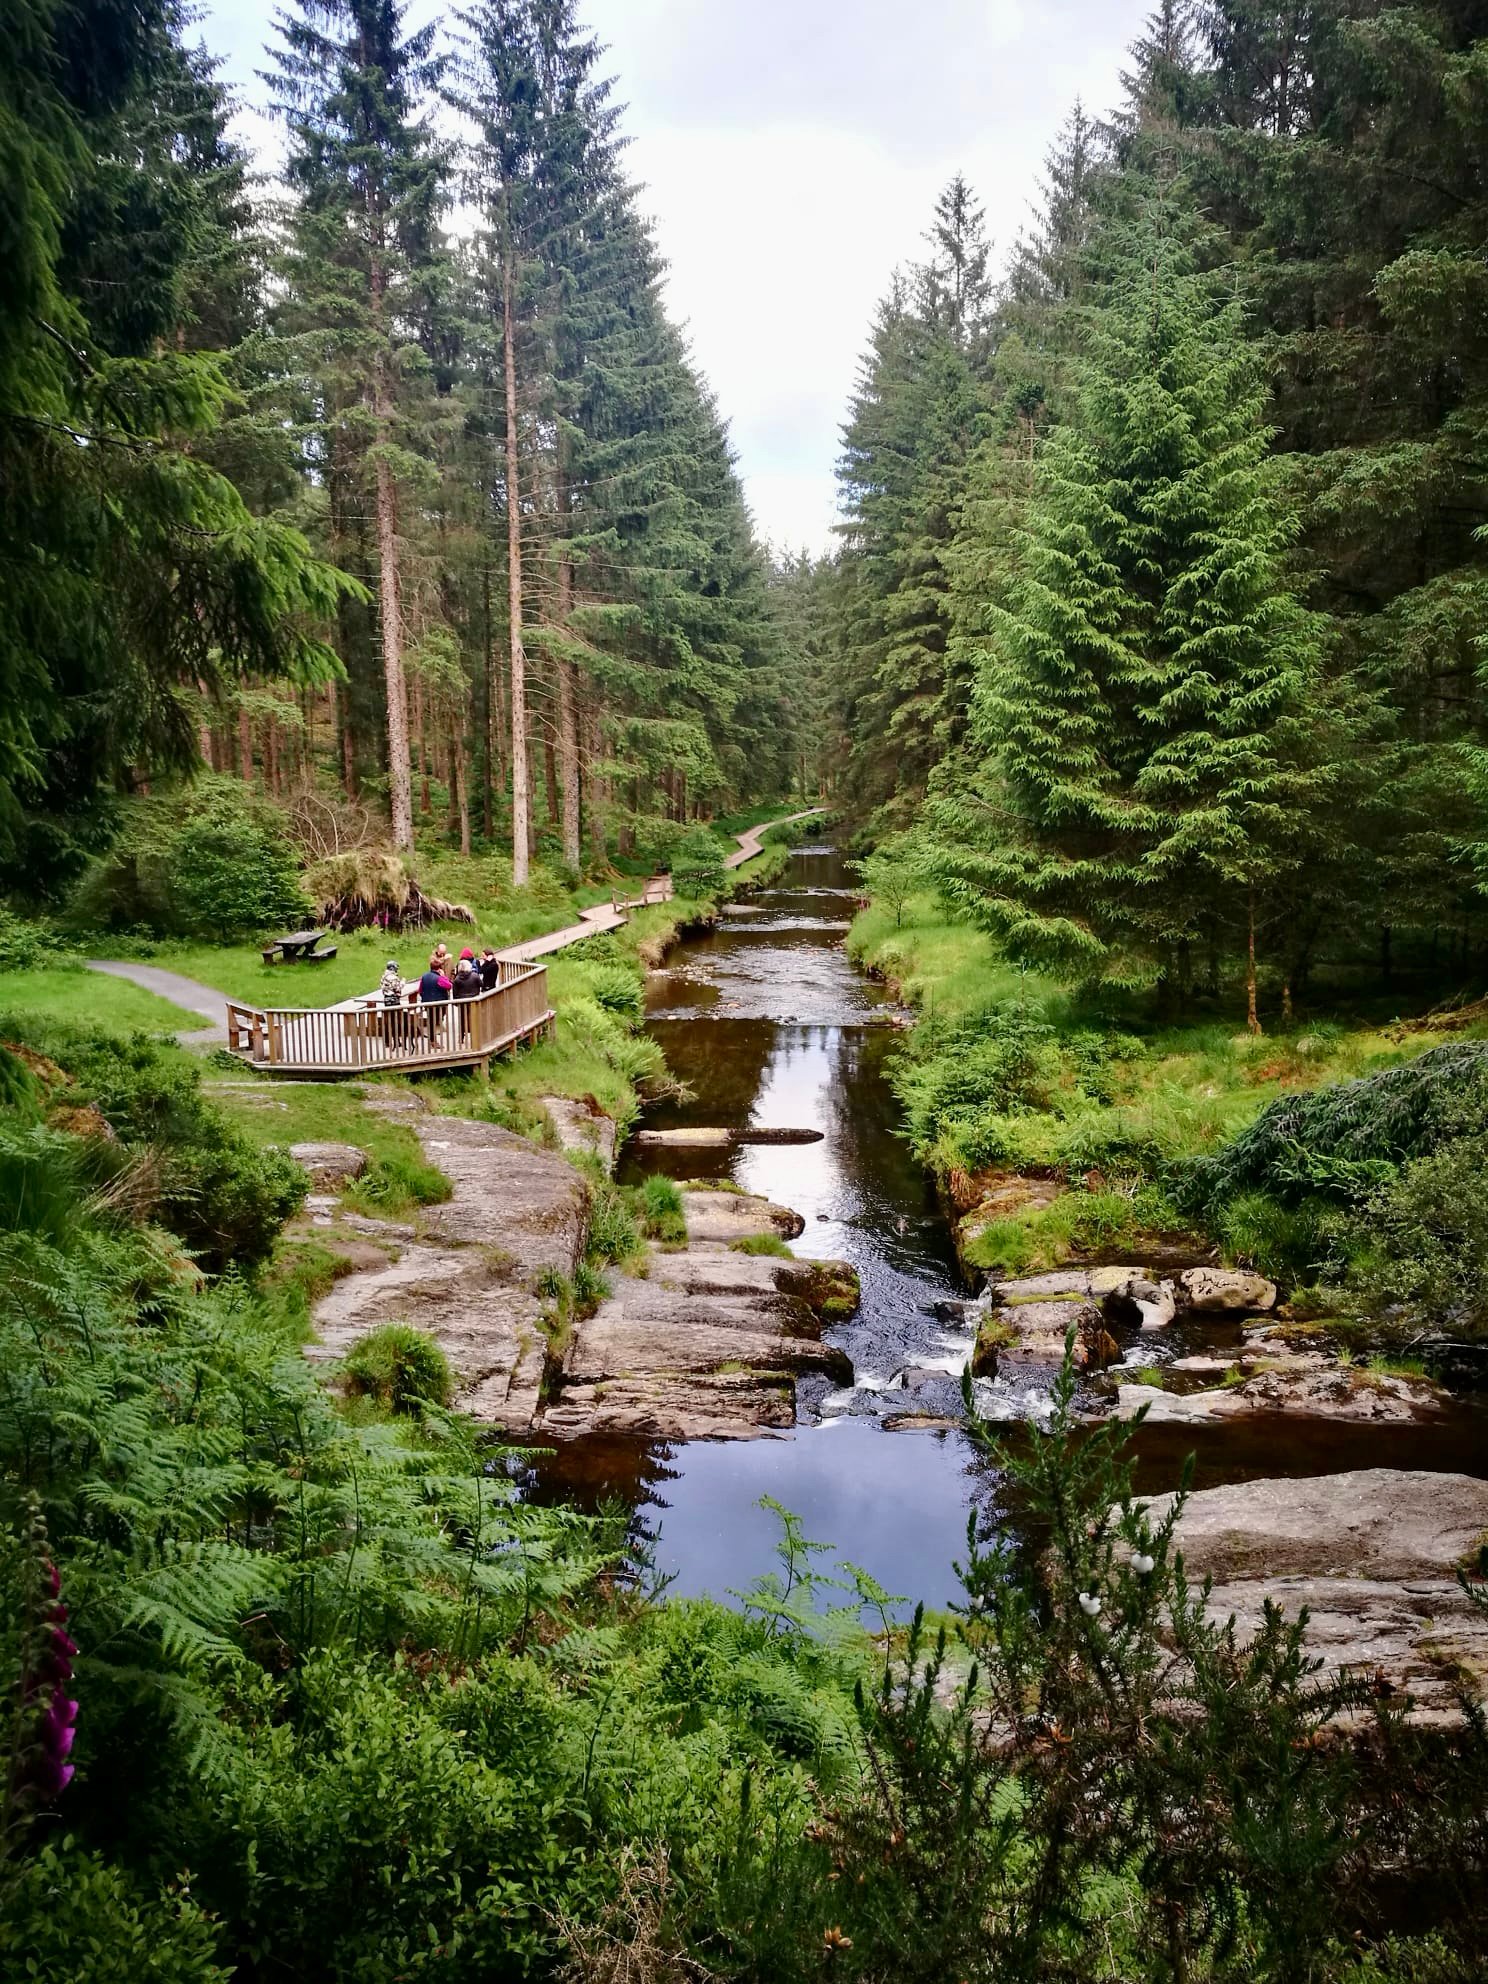 Hafren Forest in mid Wales - fantastic location for a holiday